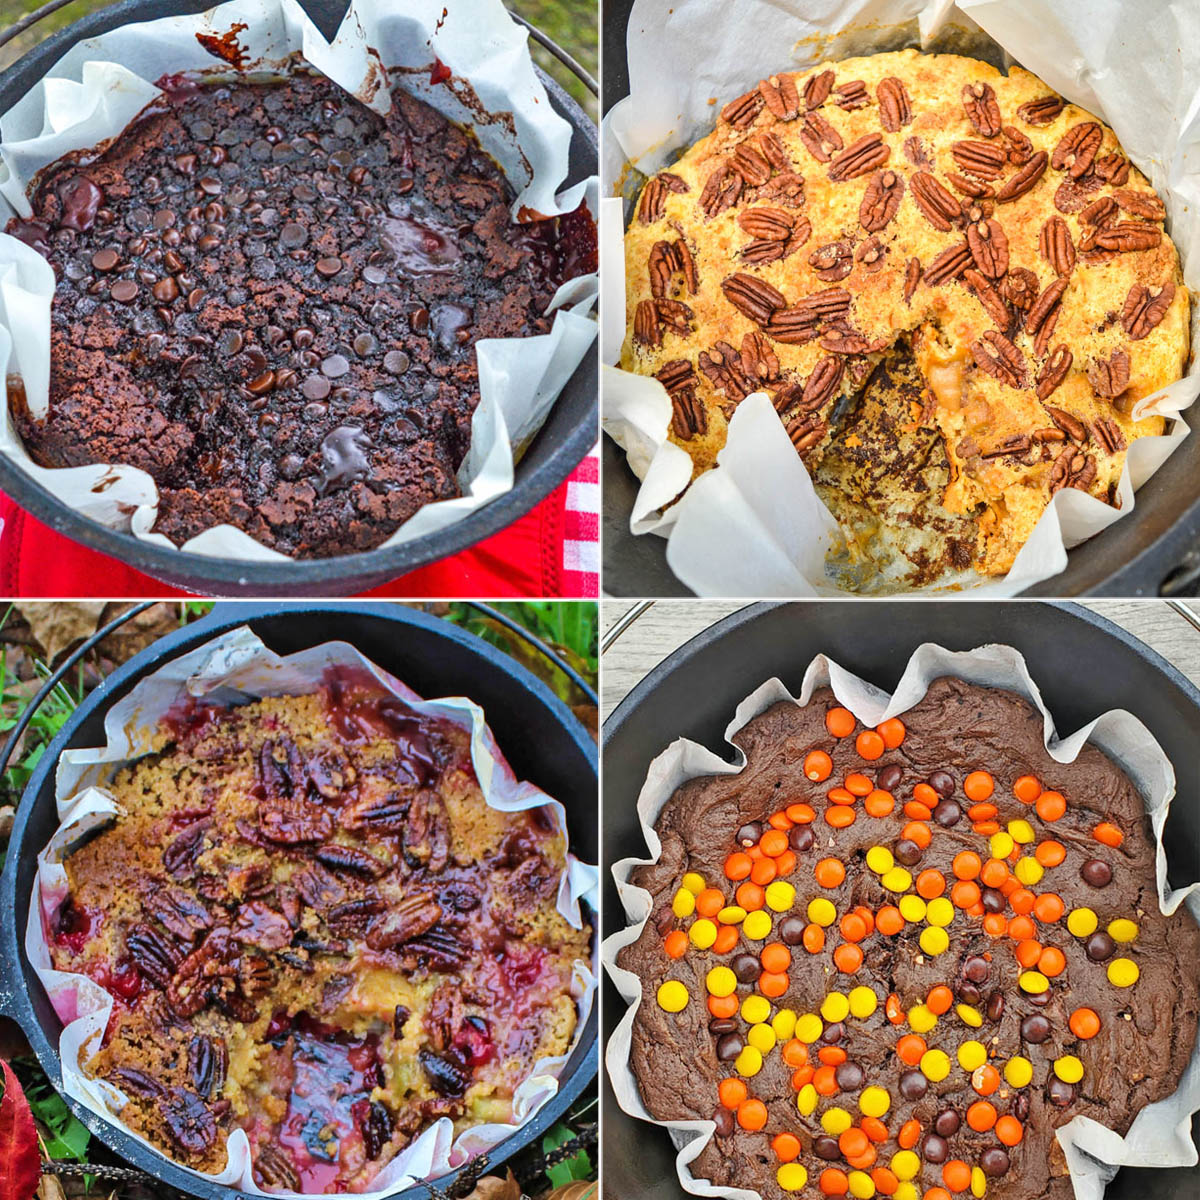 https://letscampsmore.com/wp-content/uploads/2022/03/Collection-of-Dutch-Oven-Camping-Desserts.jpg